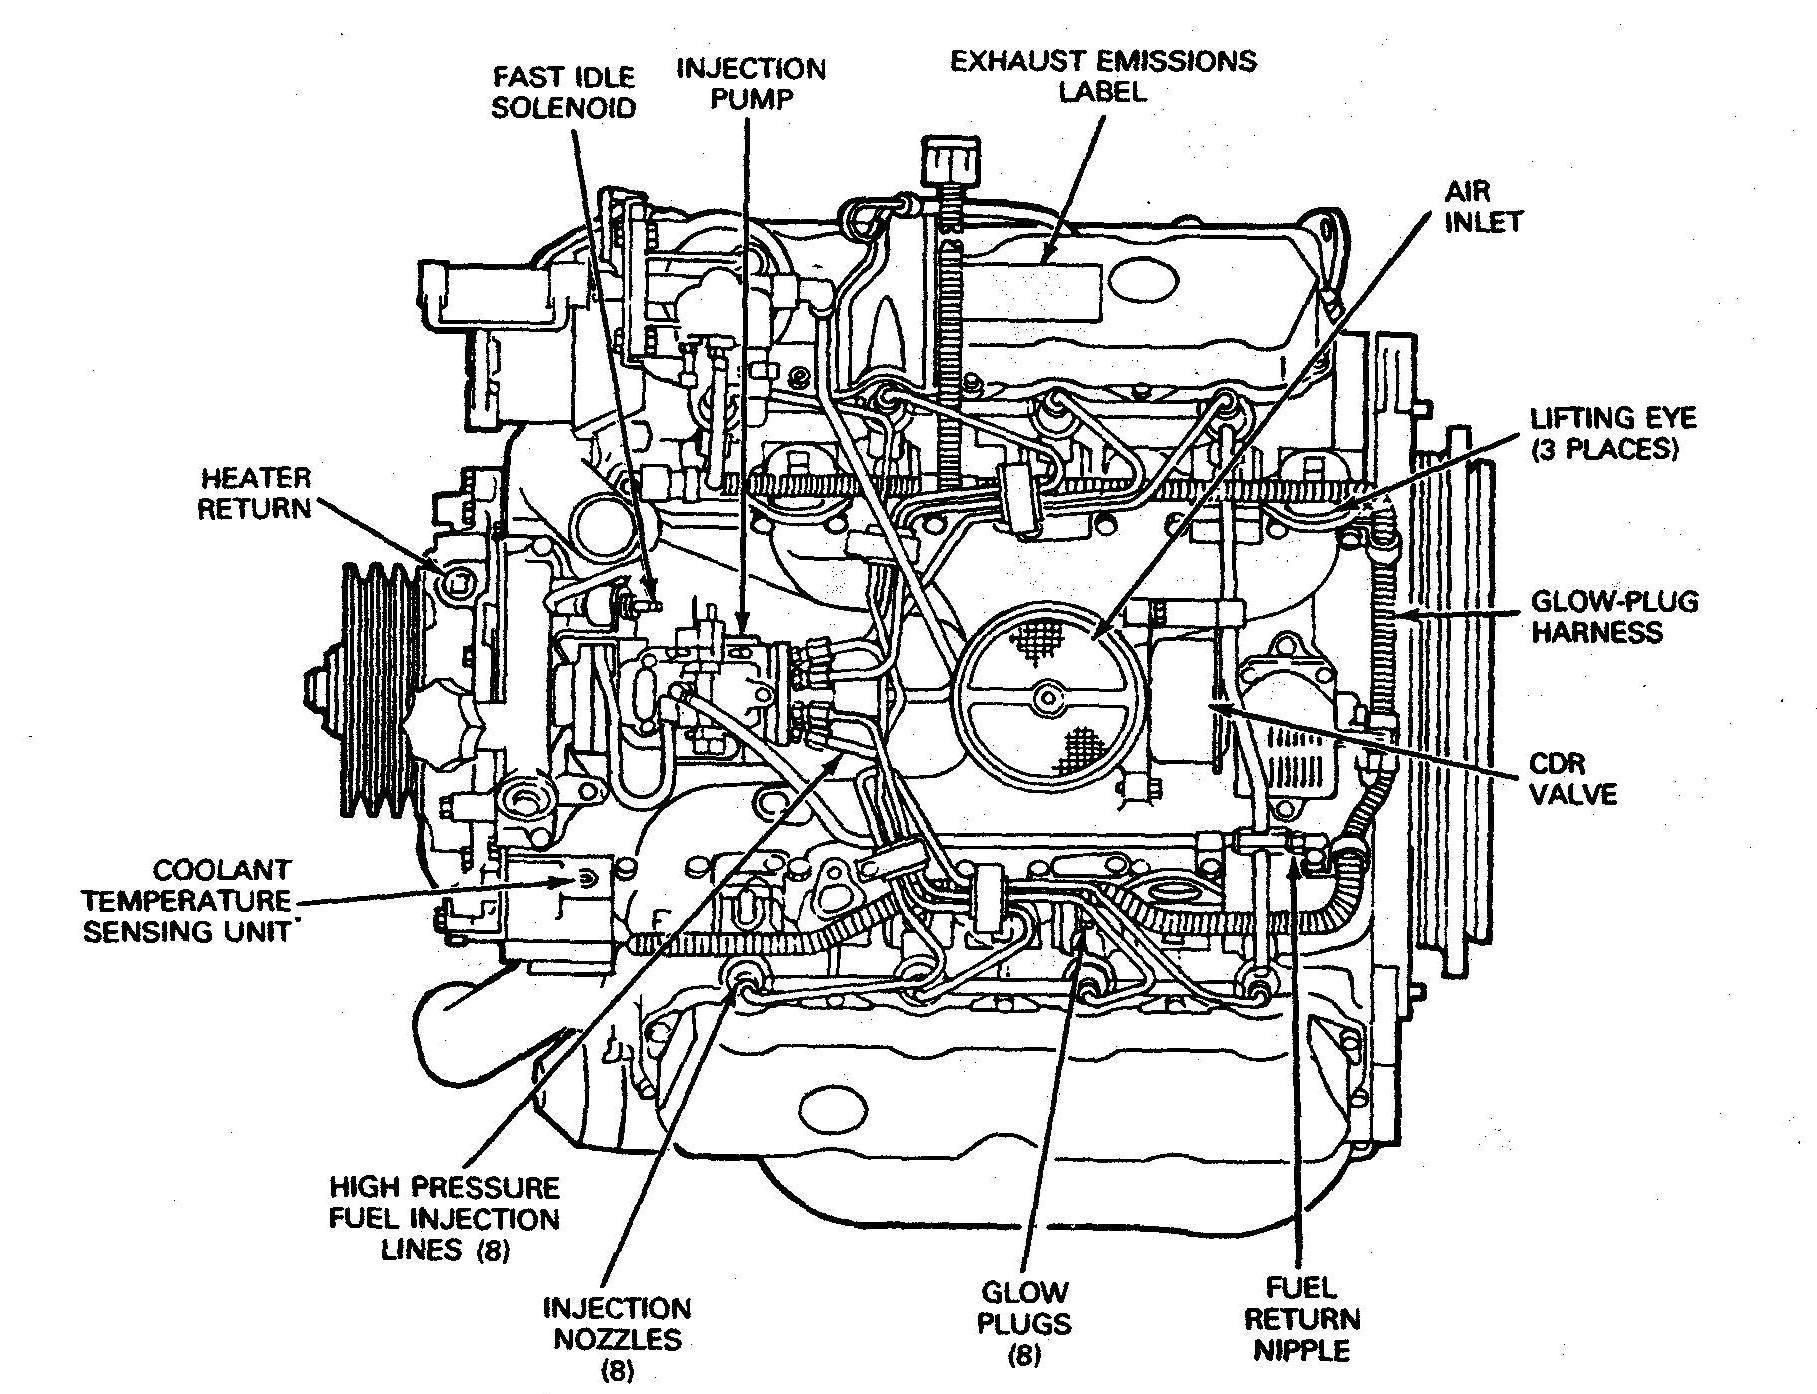 Ford model a engine drawings #6